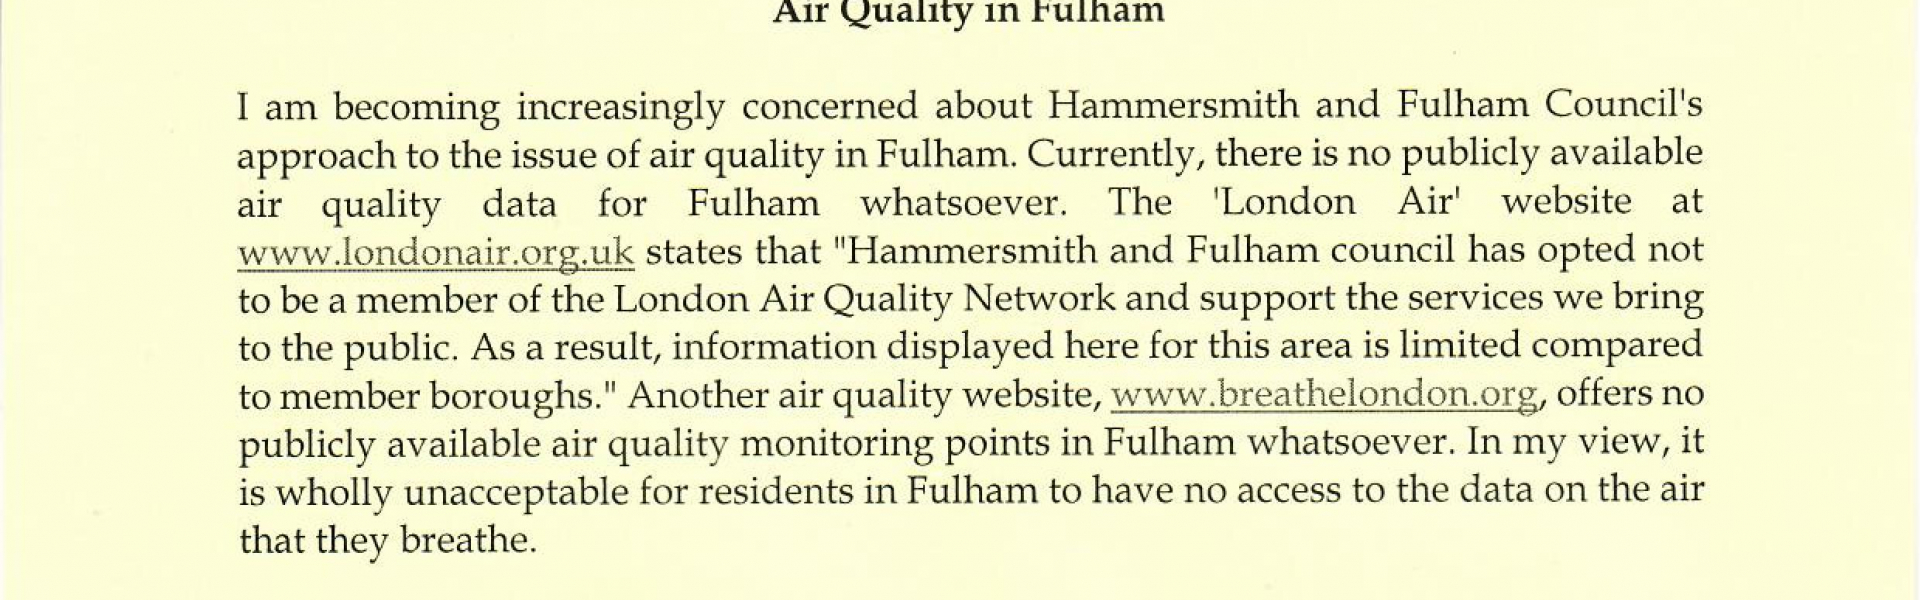 Air Quality in Fulham 1